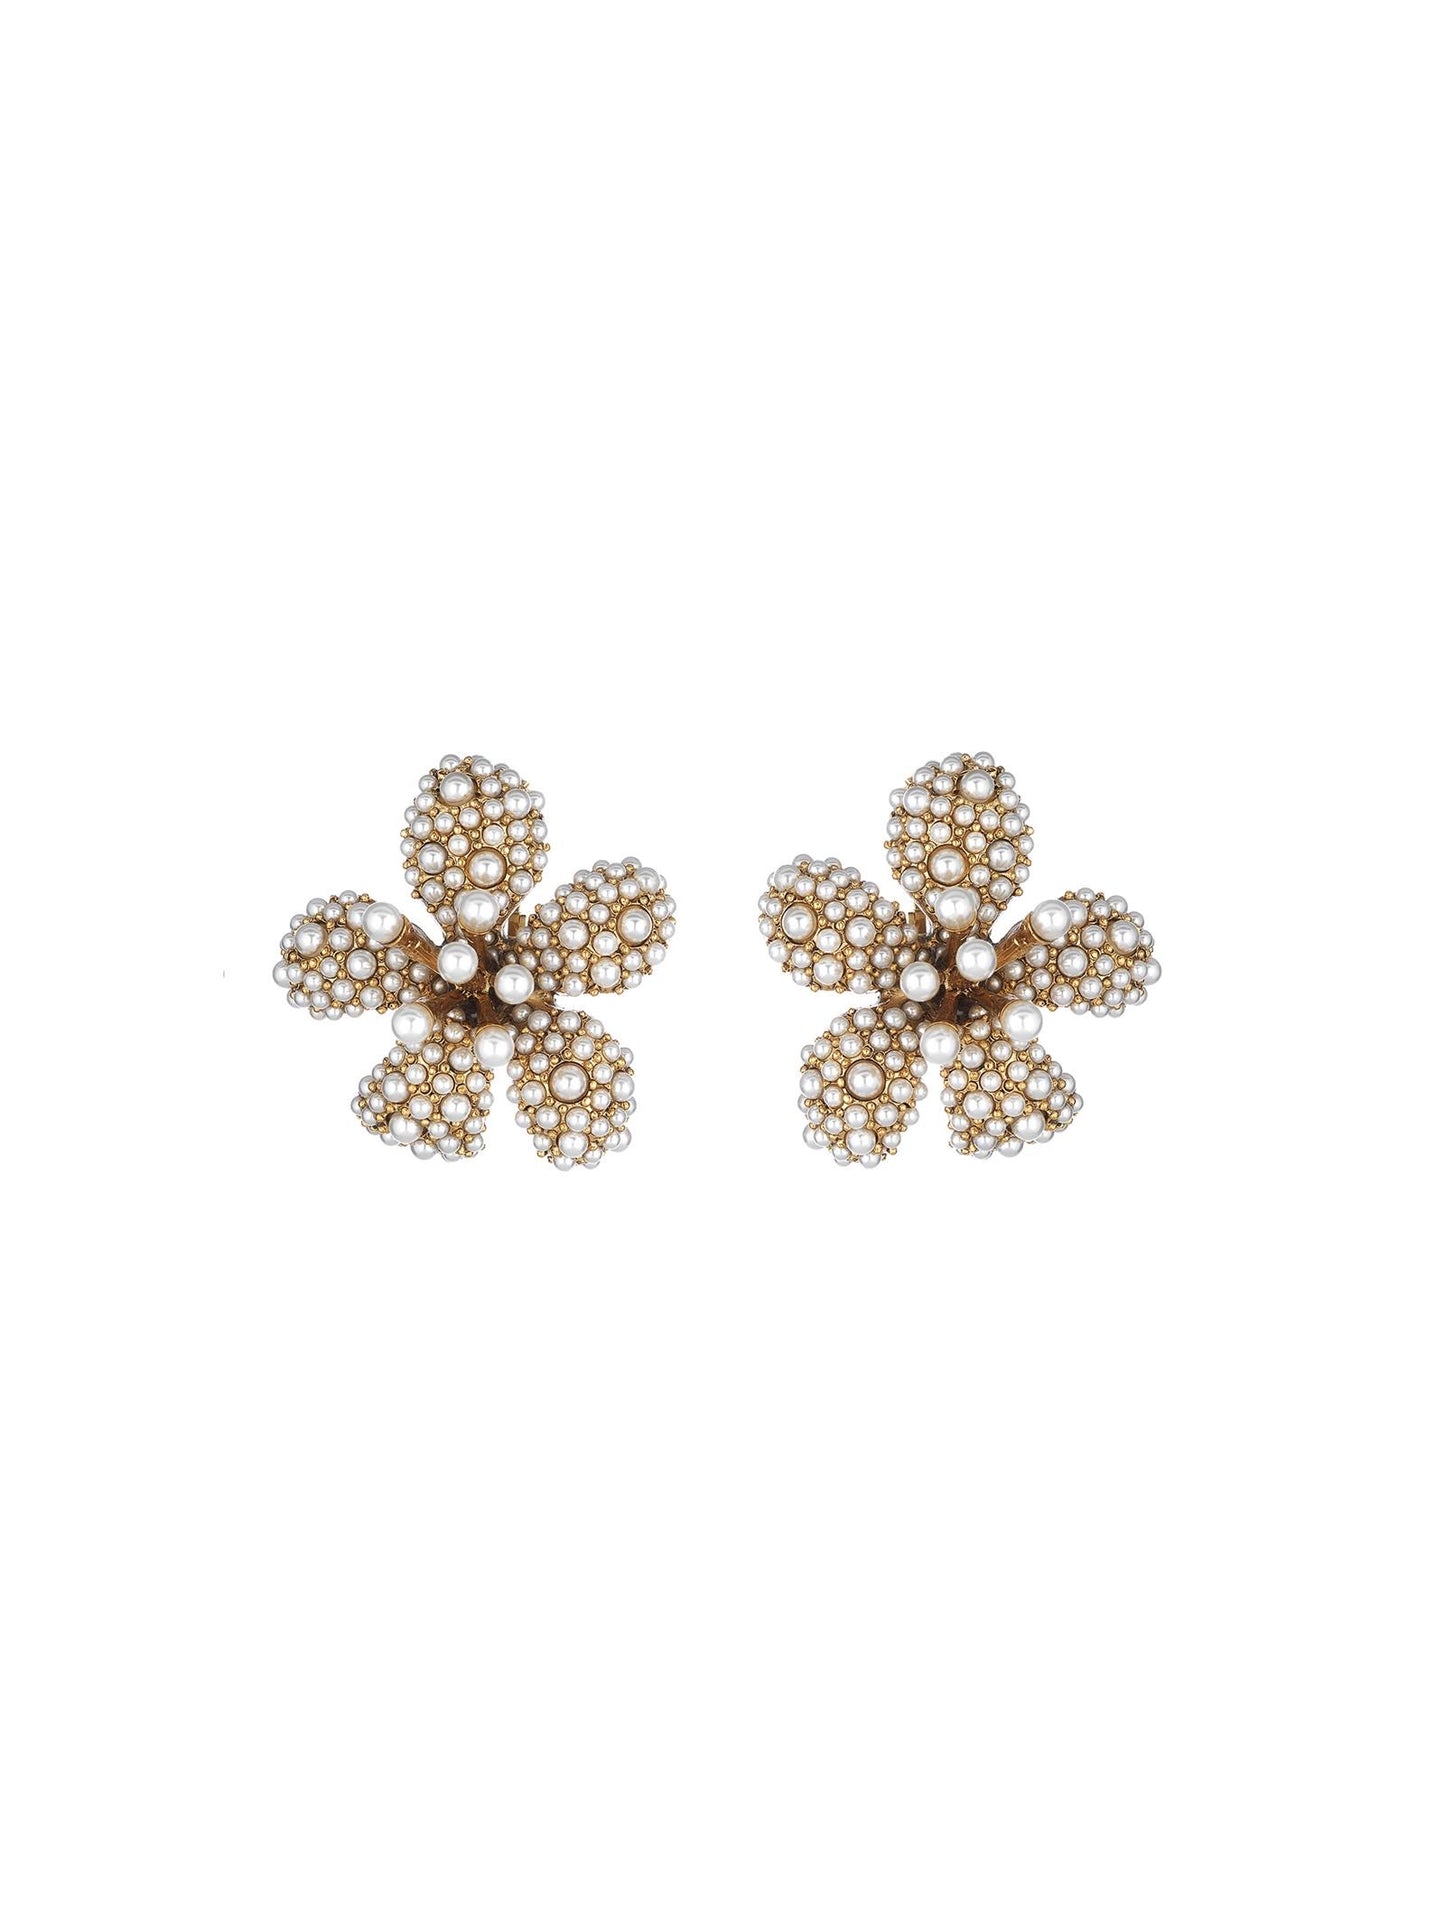 FLORA MAGNIFICA EARRING